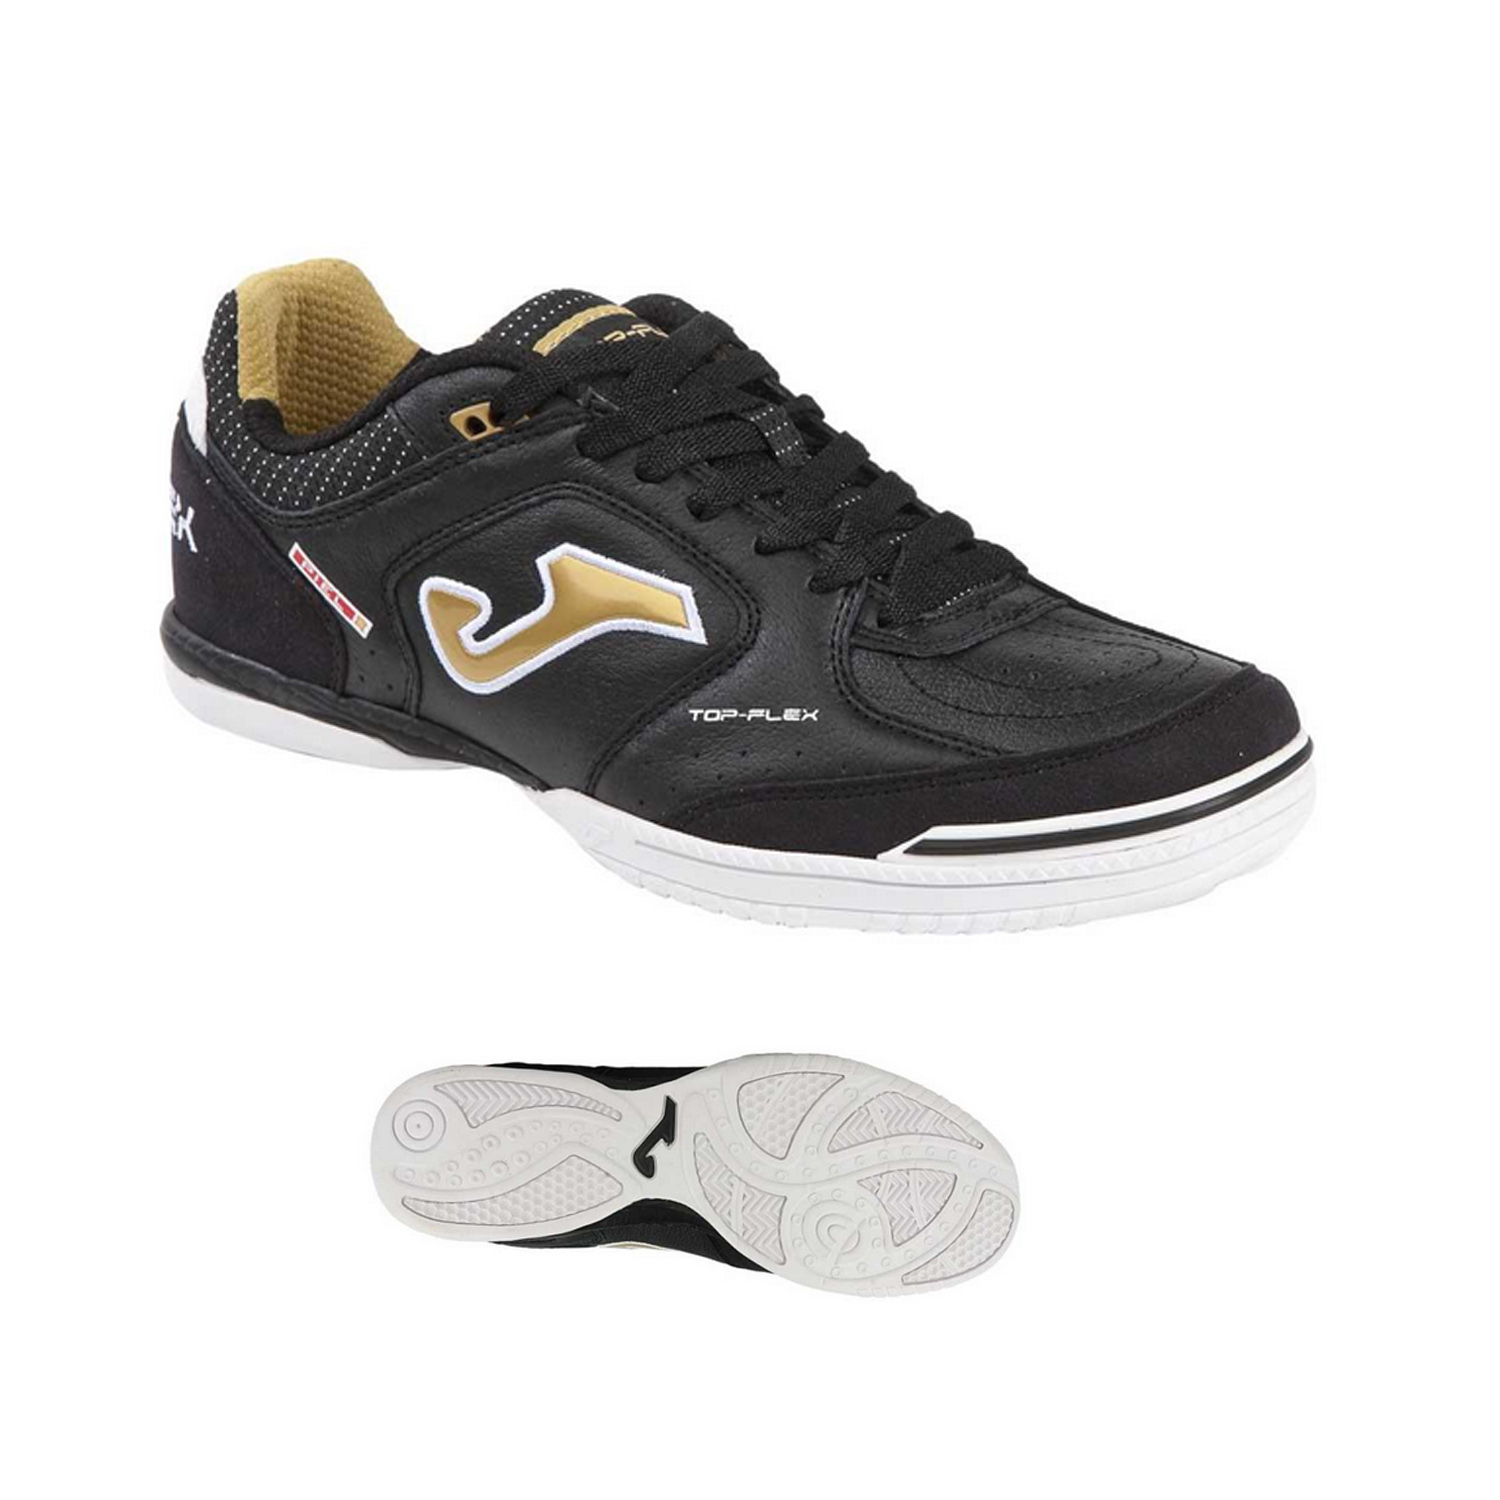 Joma Top Flex 801 Indoor Soccer Shoes (Black/White/Gold 